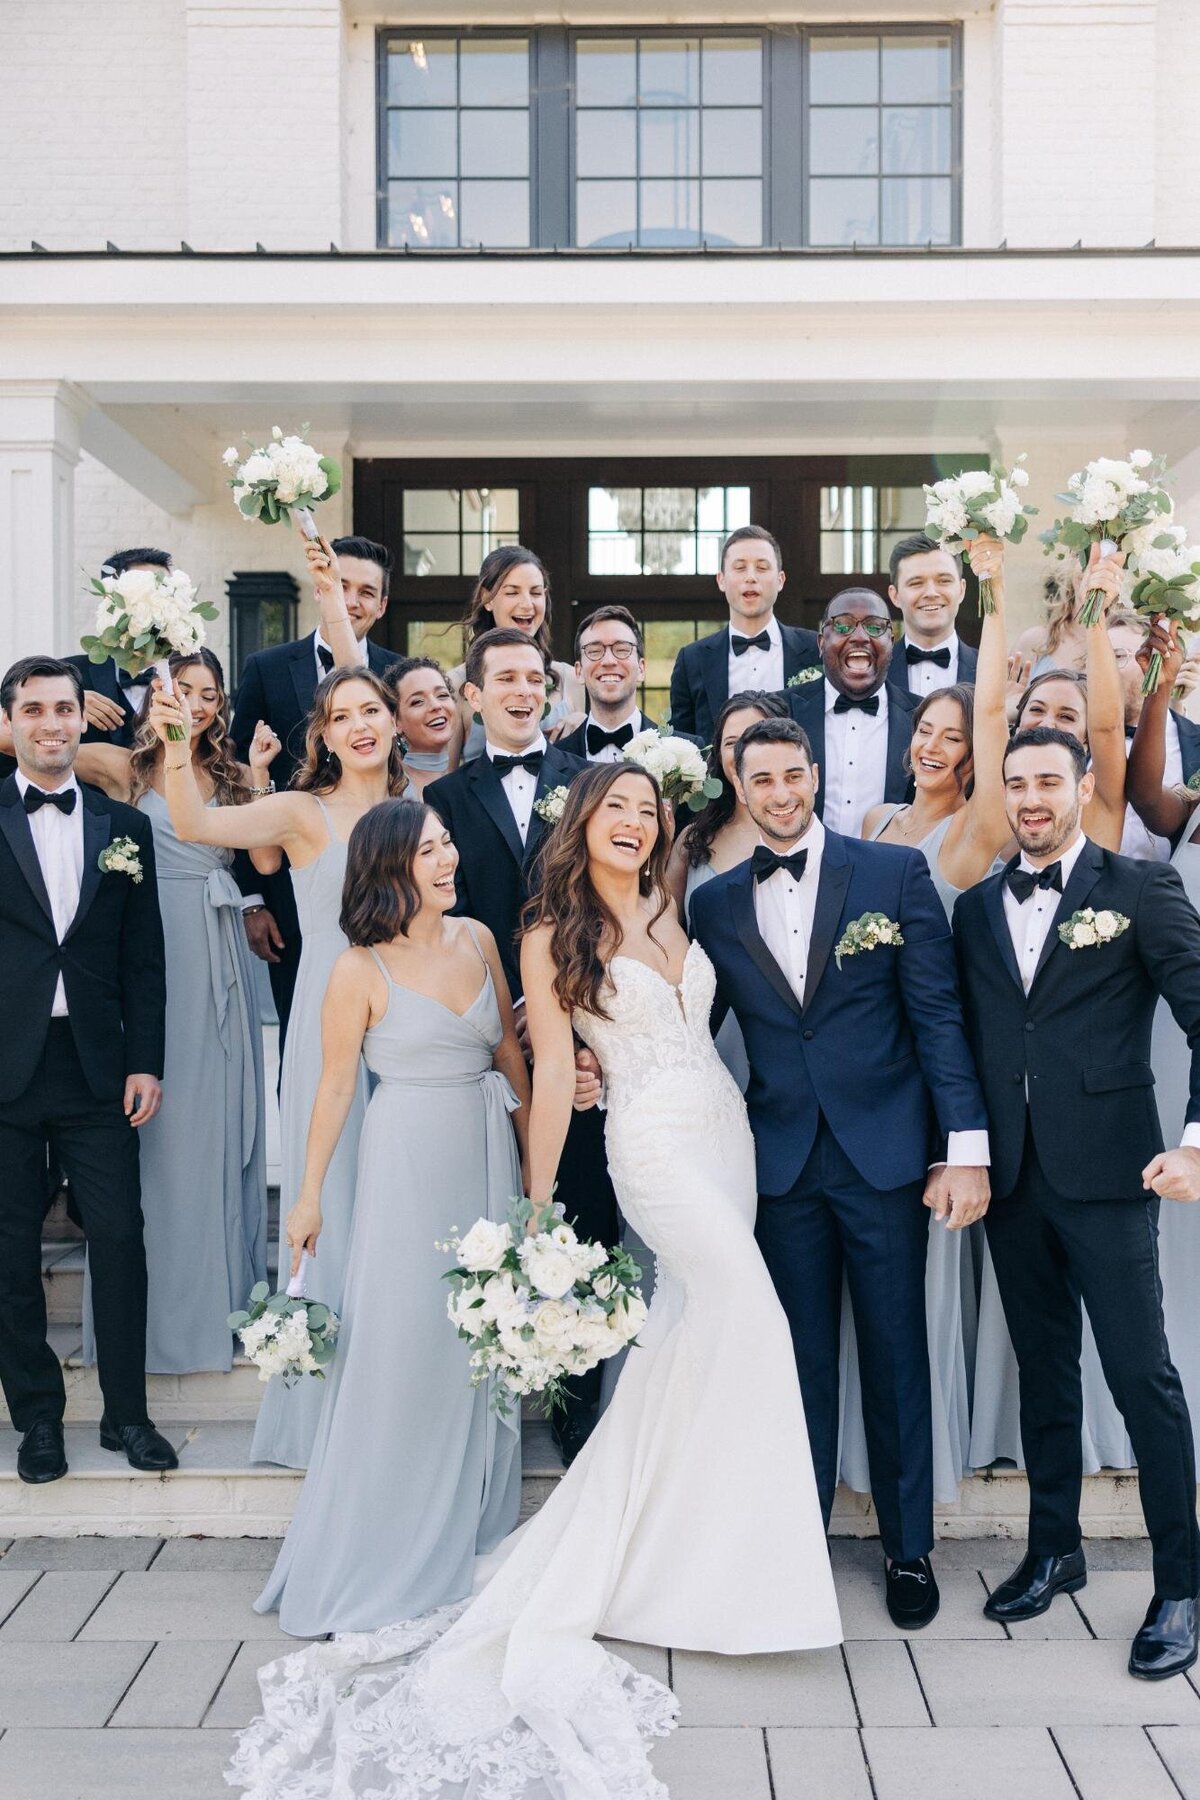 A joyful wedding party posing for a photo, featuring a bride and groom with their bridesmaids and groomsmen in coordinated attire.